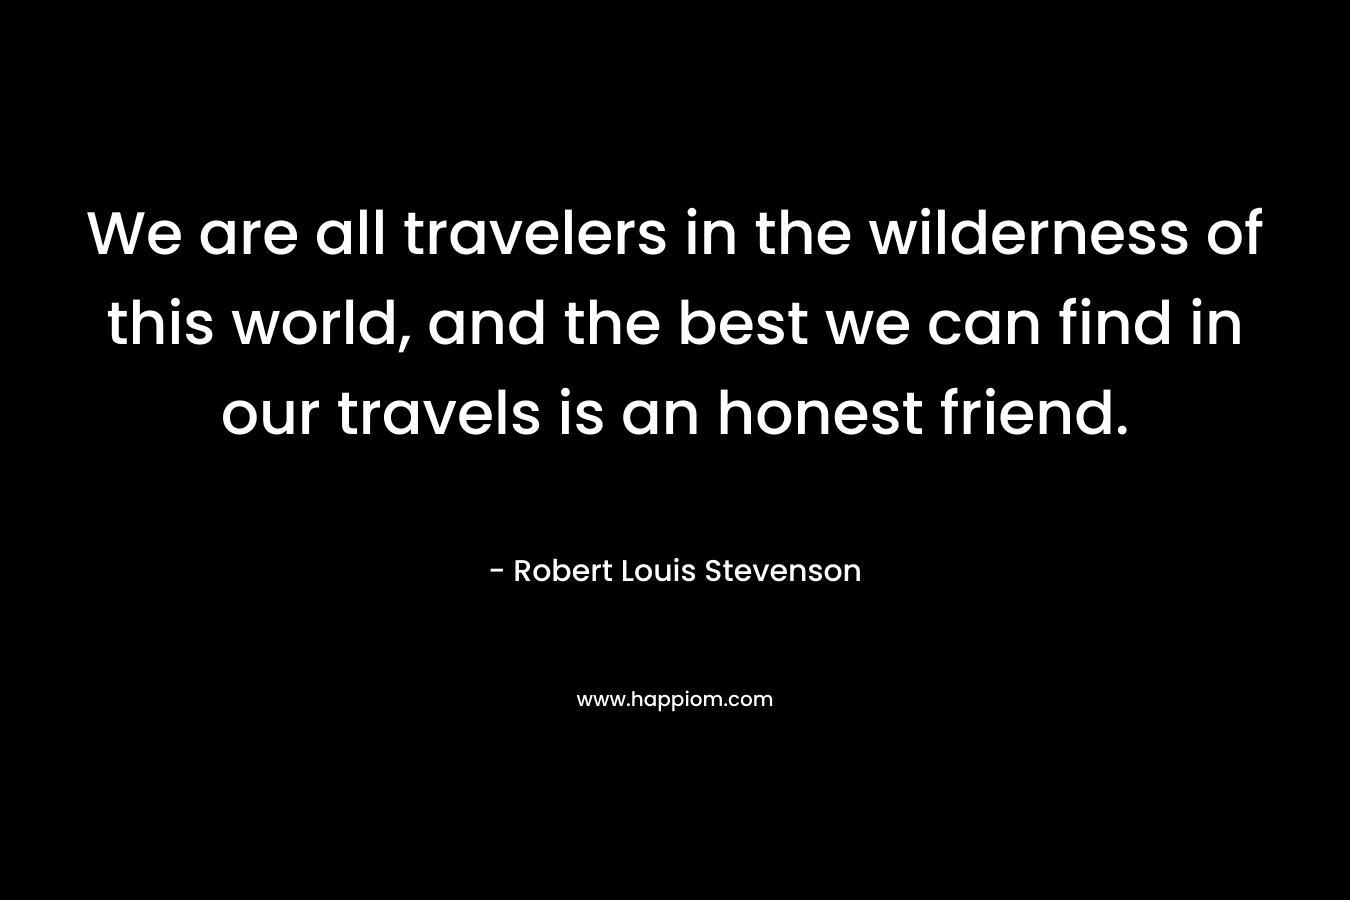 We are all travelers in the wilderness of this world, and the best we can find in our travels is an honest friend. – Robert Louis Stevenson